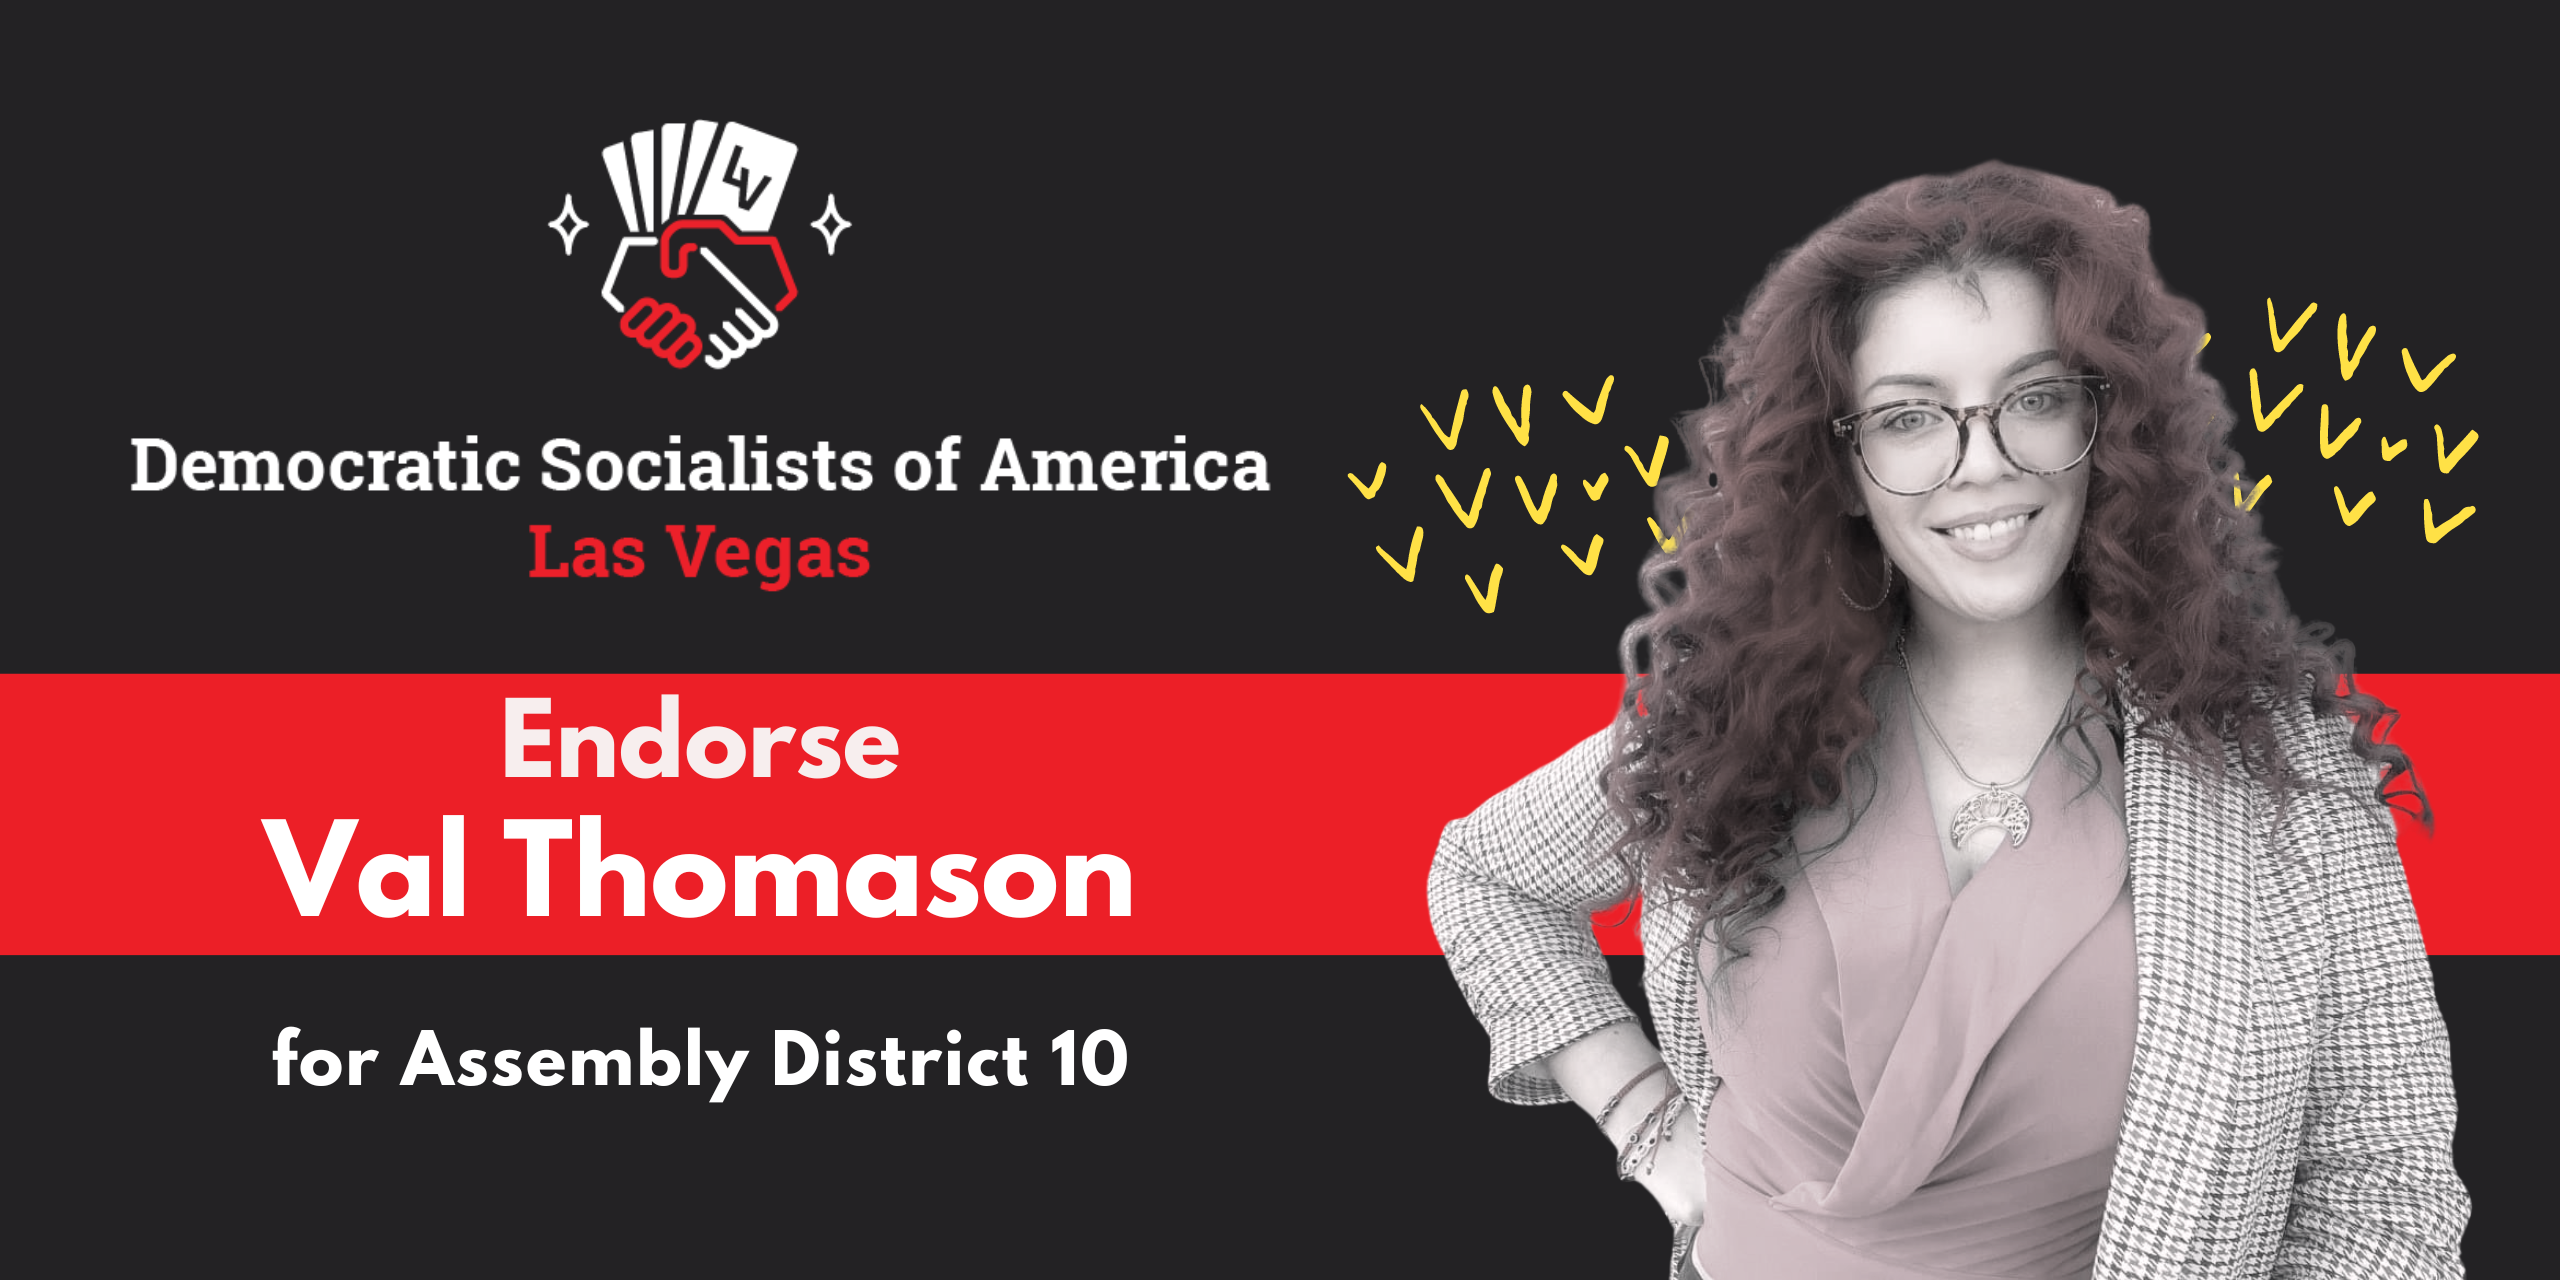 Logo of Las Vegas Democratic Socialists of America above text that reads "Endorse Val Thomason for Assembly District 10". A picture of Val is included.